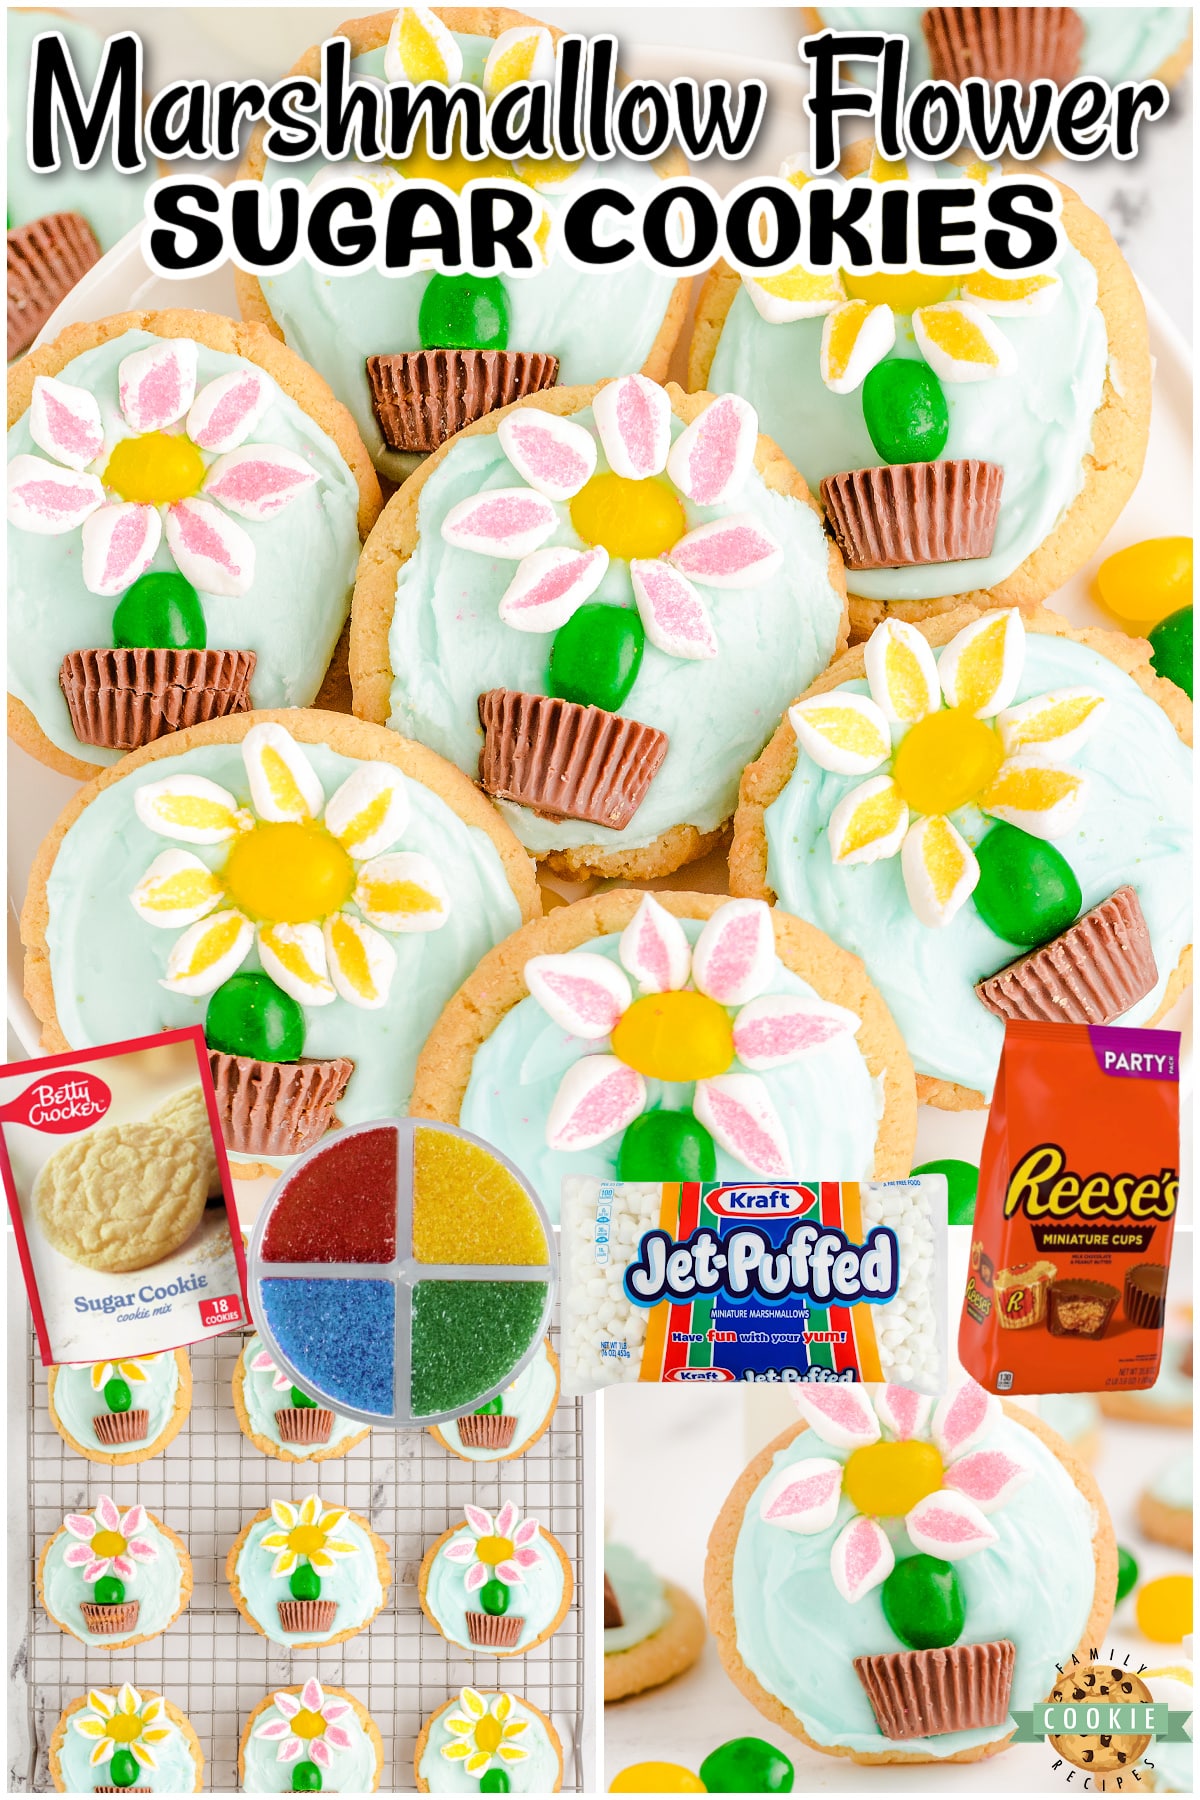 Marshmallow Flower Cookies are easy to make and perfect for Spring baking! Cute flower sugar cookies topped with marshmallow flowers, a jelly bean stem, in a peanut butter chocolate pot.